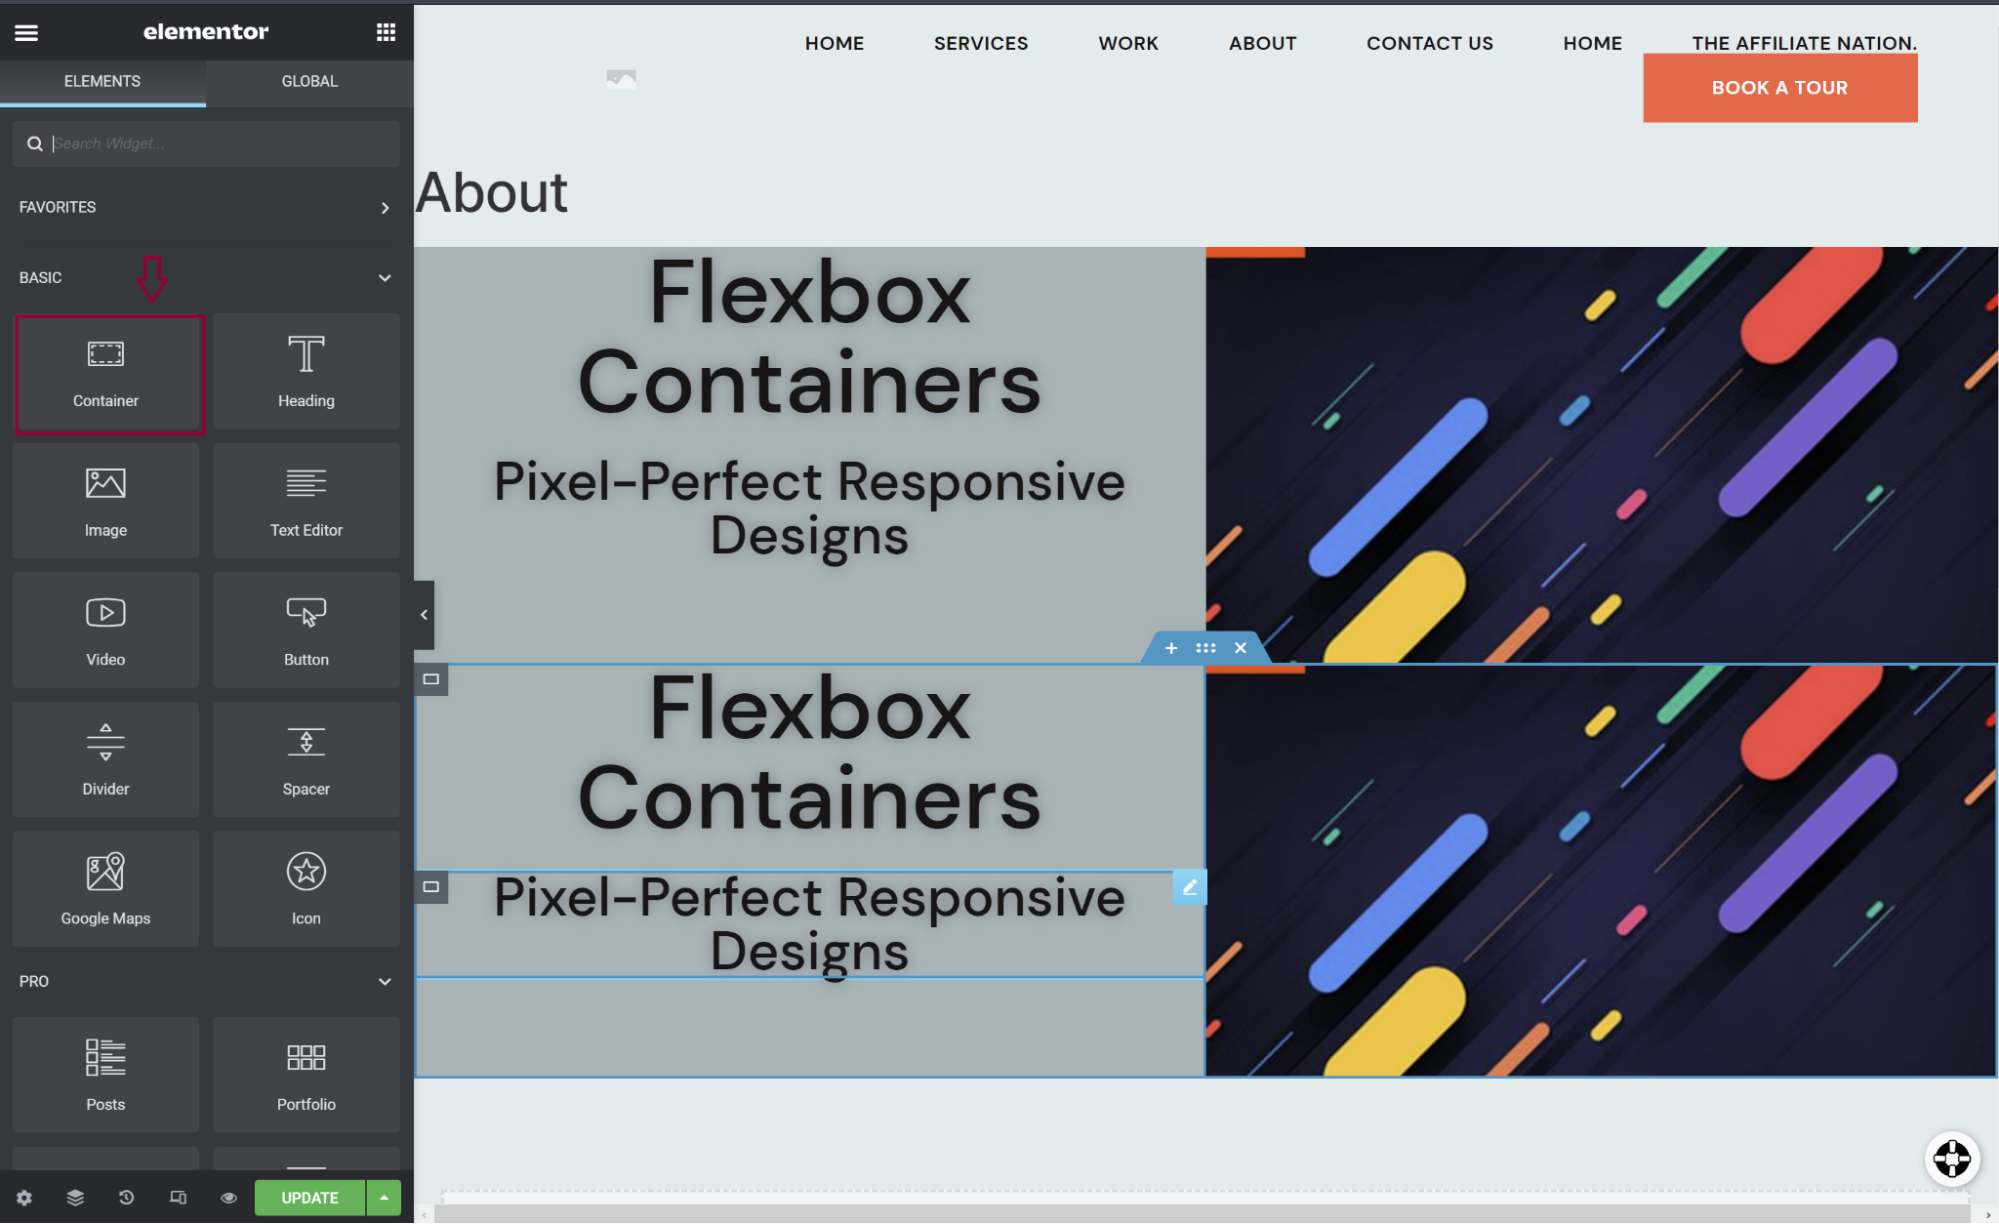 Screenshot of Elementor Flexblox Container being implemented on web page feature.